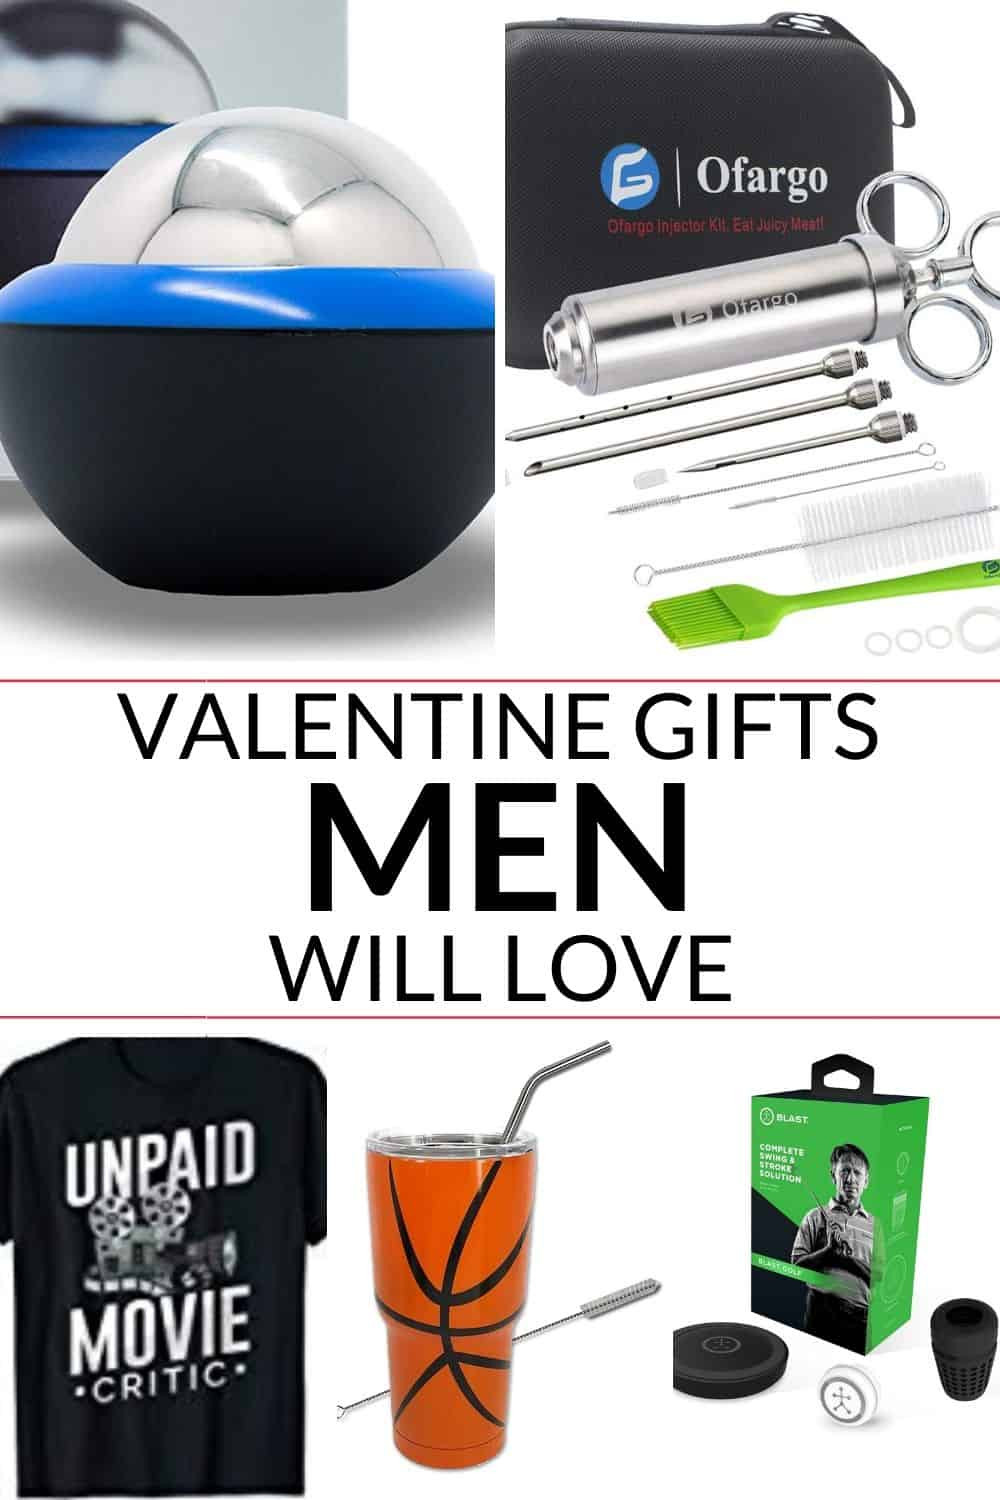 Valentine Gift Ideas For Husbands
 Valentine Gift for Husband Great ideas